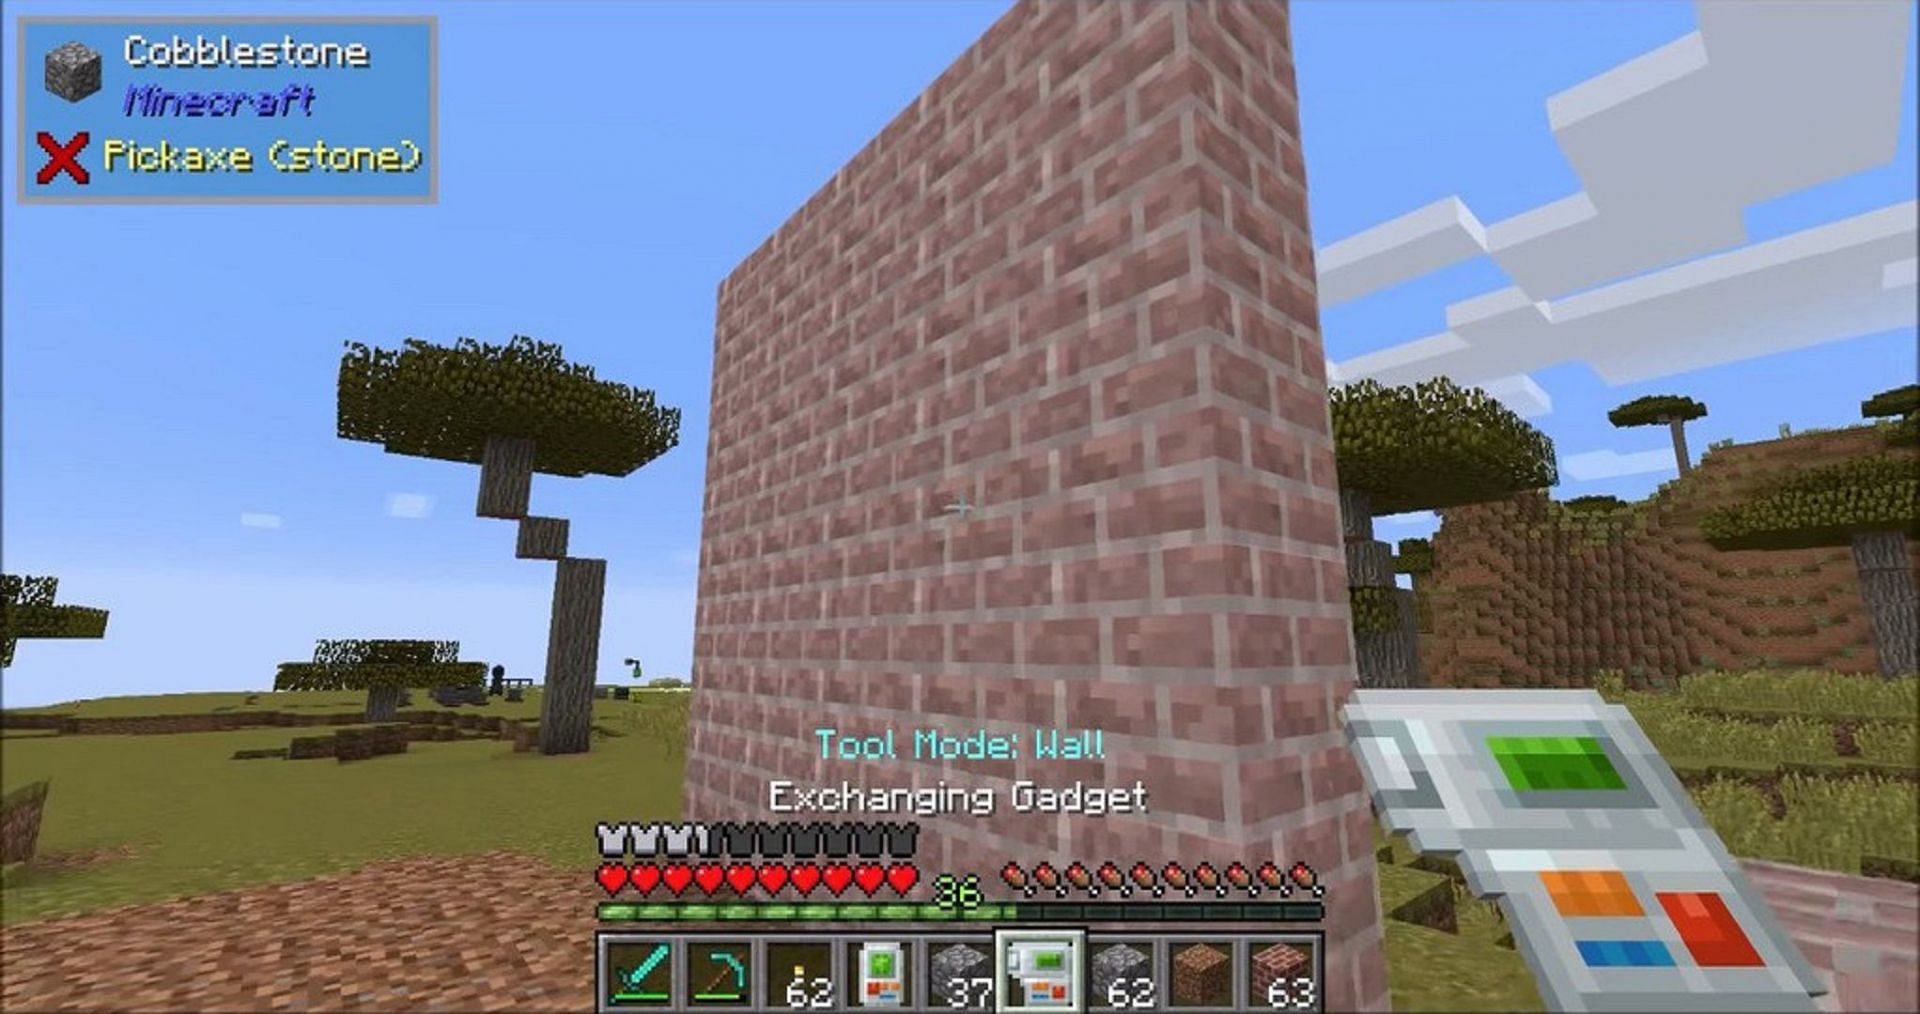 Building Gadgets provides a very helpful suit of tools to assist players in construction (Image via 9Minecraft)